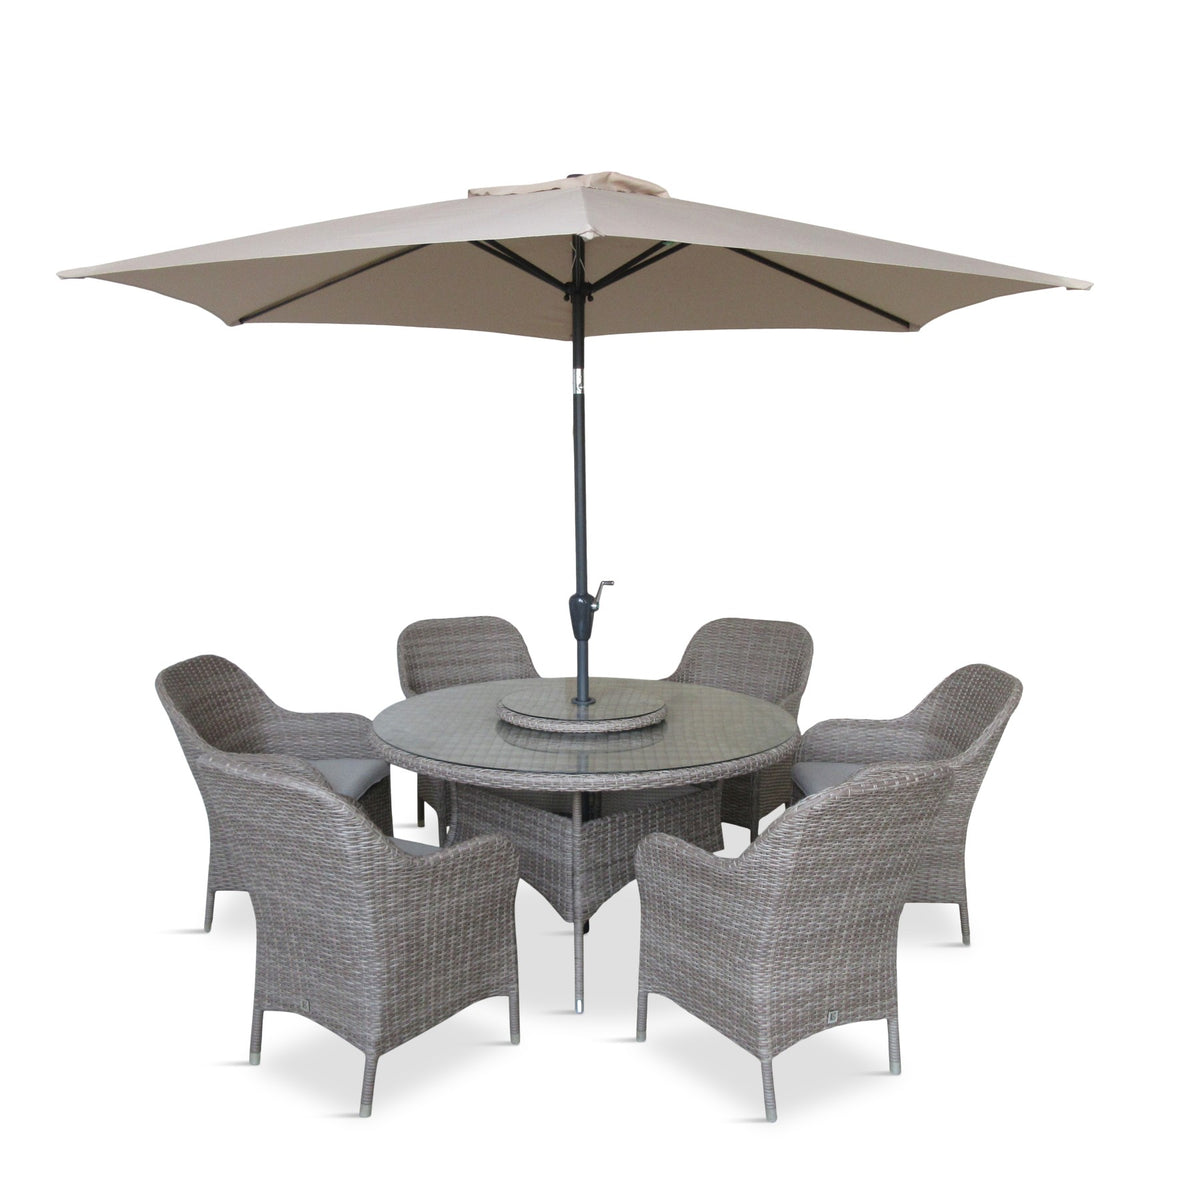 LG Outdoor Monte Carlo Sand Rattan Weave 6 Seat Garden Furniture Dining Set with Lazy Susan